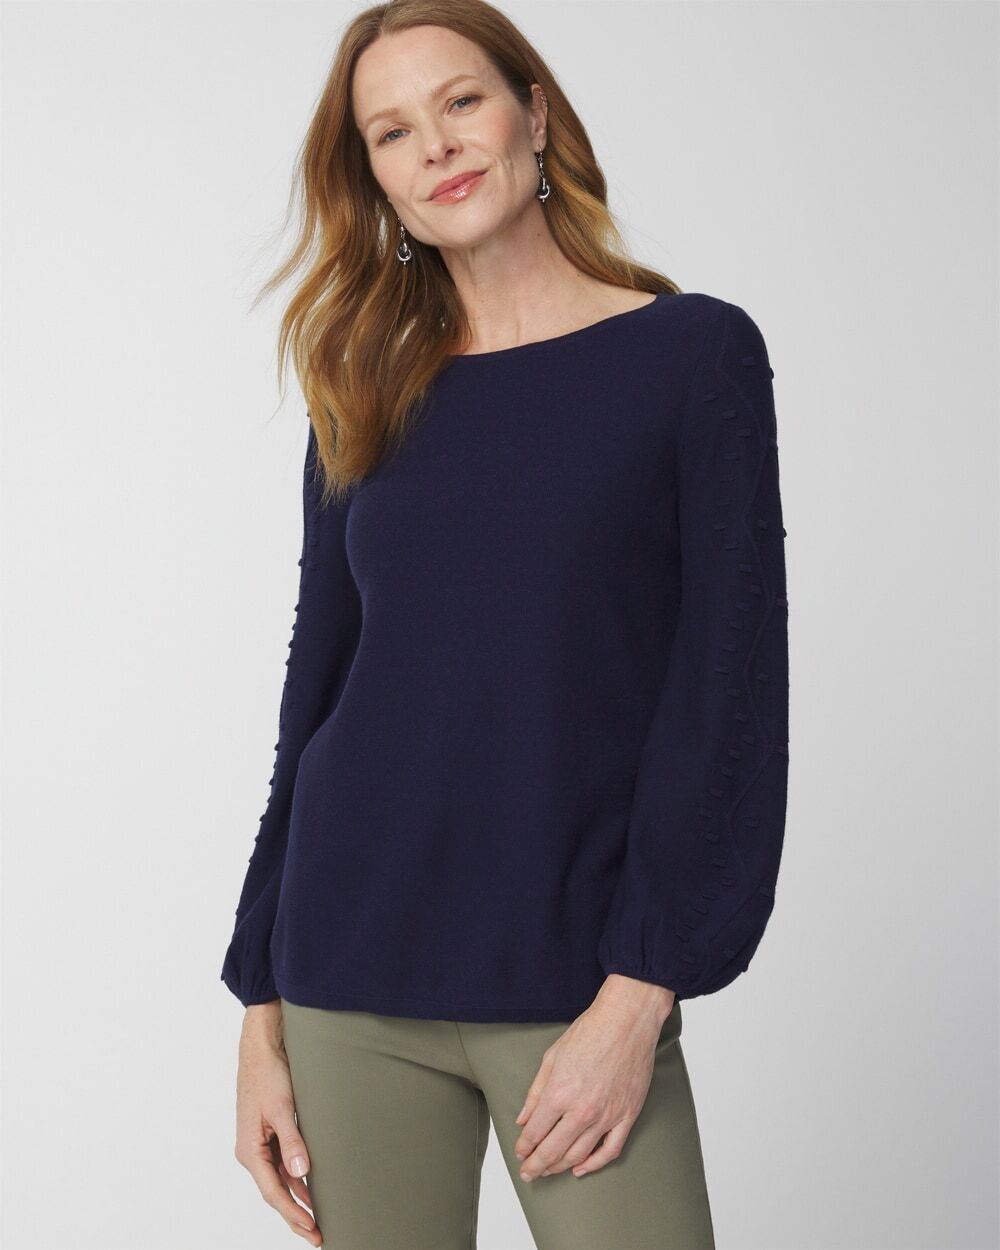 Chico's Off The Rack Women's Bubble Sweater in Midnight Dark Blue Size 4 (20/22-XXL)   Chico's Outlet, Clearance Women's Clothing - Midnight Dark Blue - Women - Size: 4 (20/22-XXL)